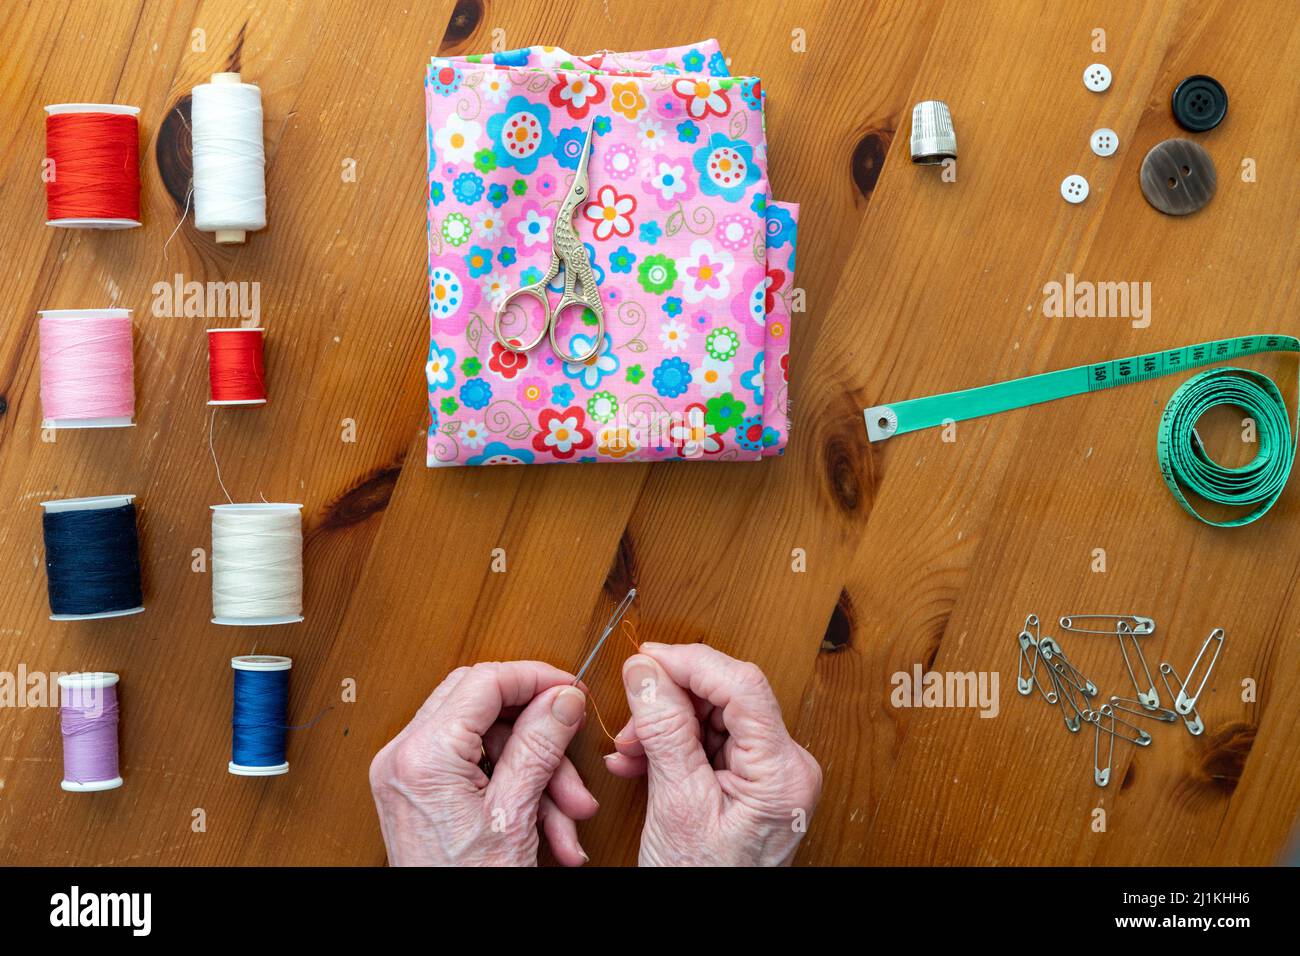 Hands of older person with arthritis enjoying sewing in a flat lay style surrrrounded by sewing accessories Stock Photo